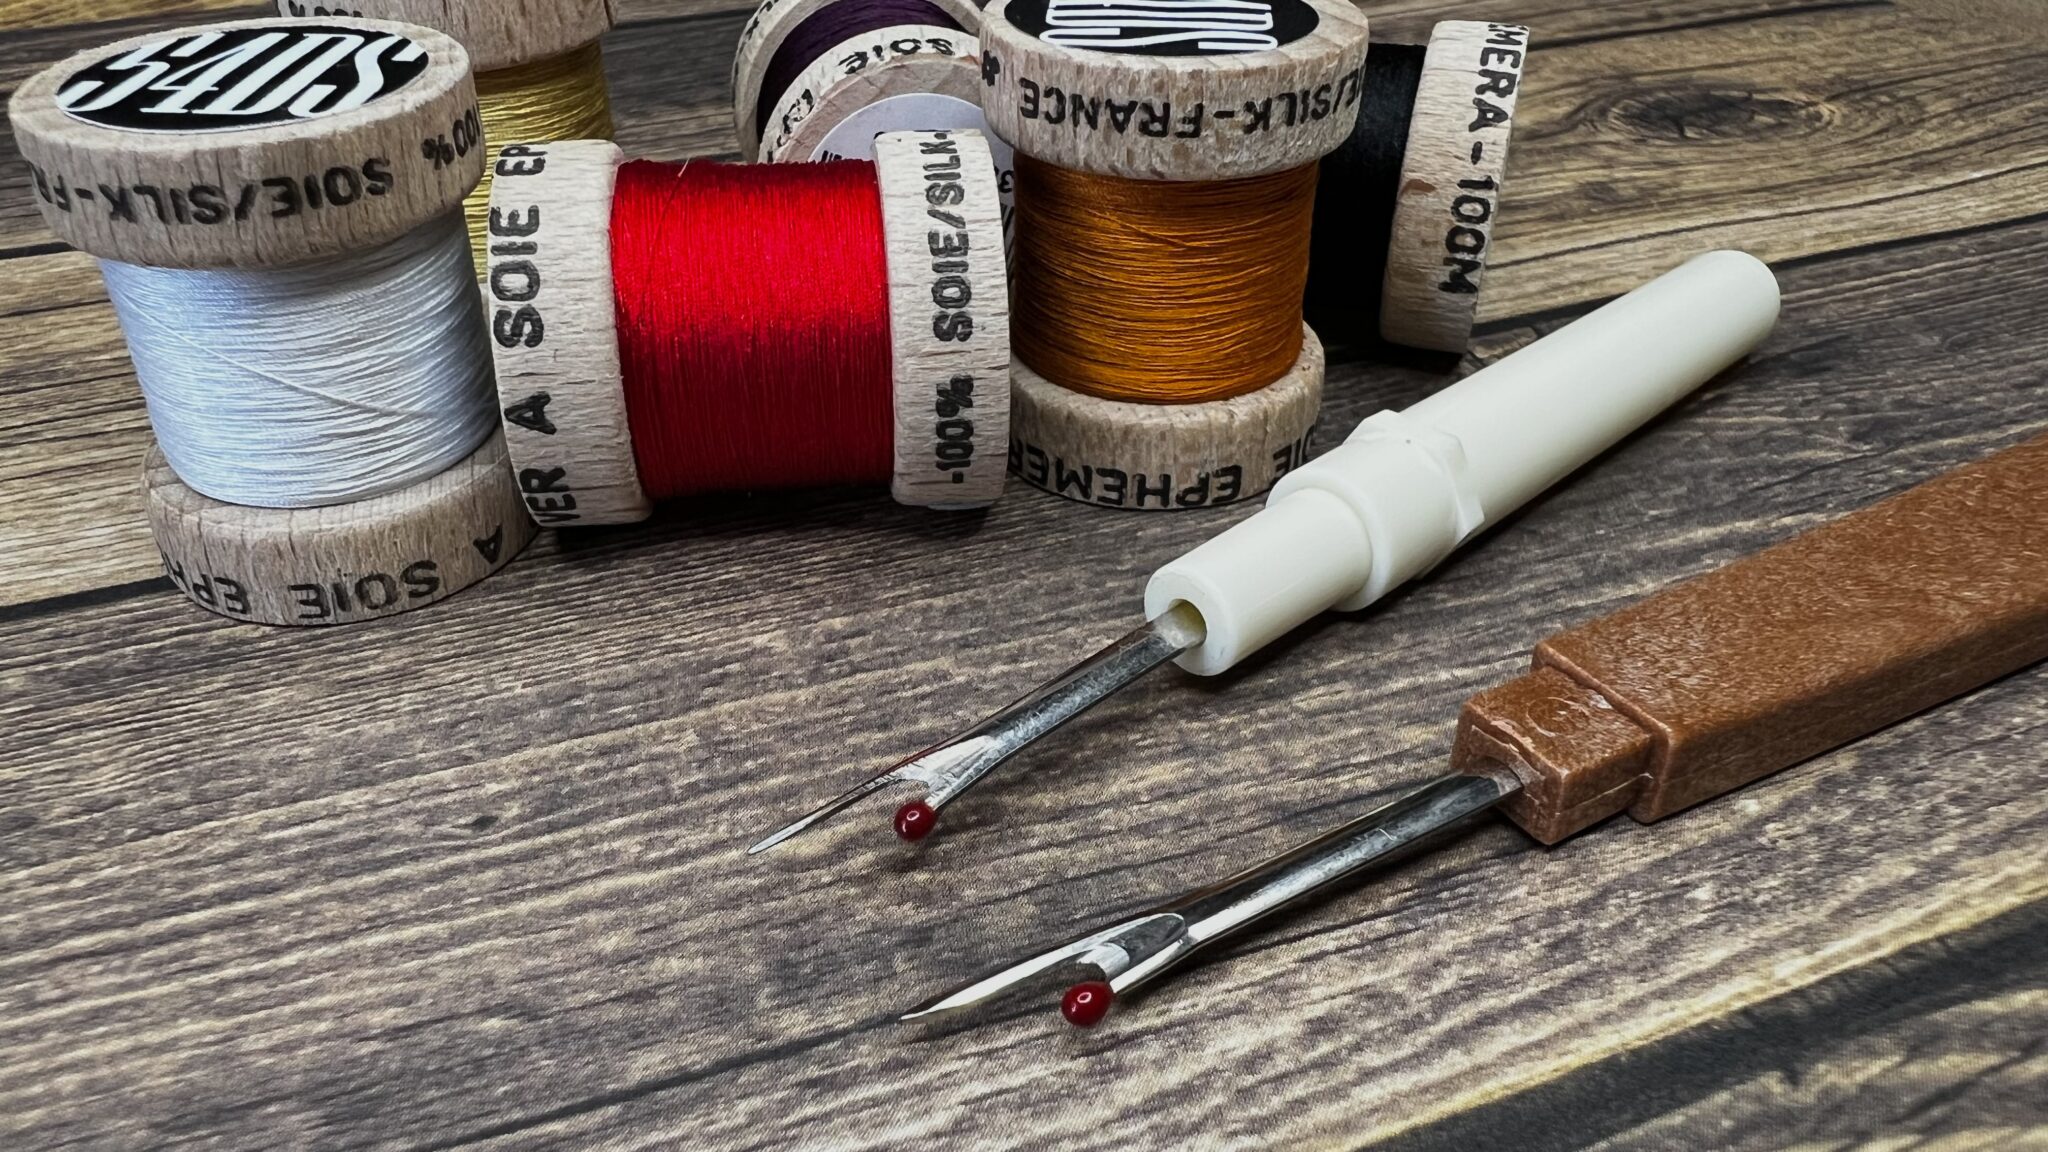 Use a Seam Ripper to Cut your Fly-Tying Thread